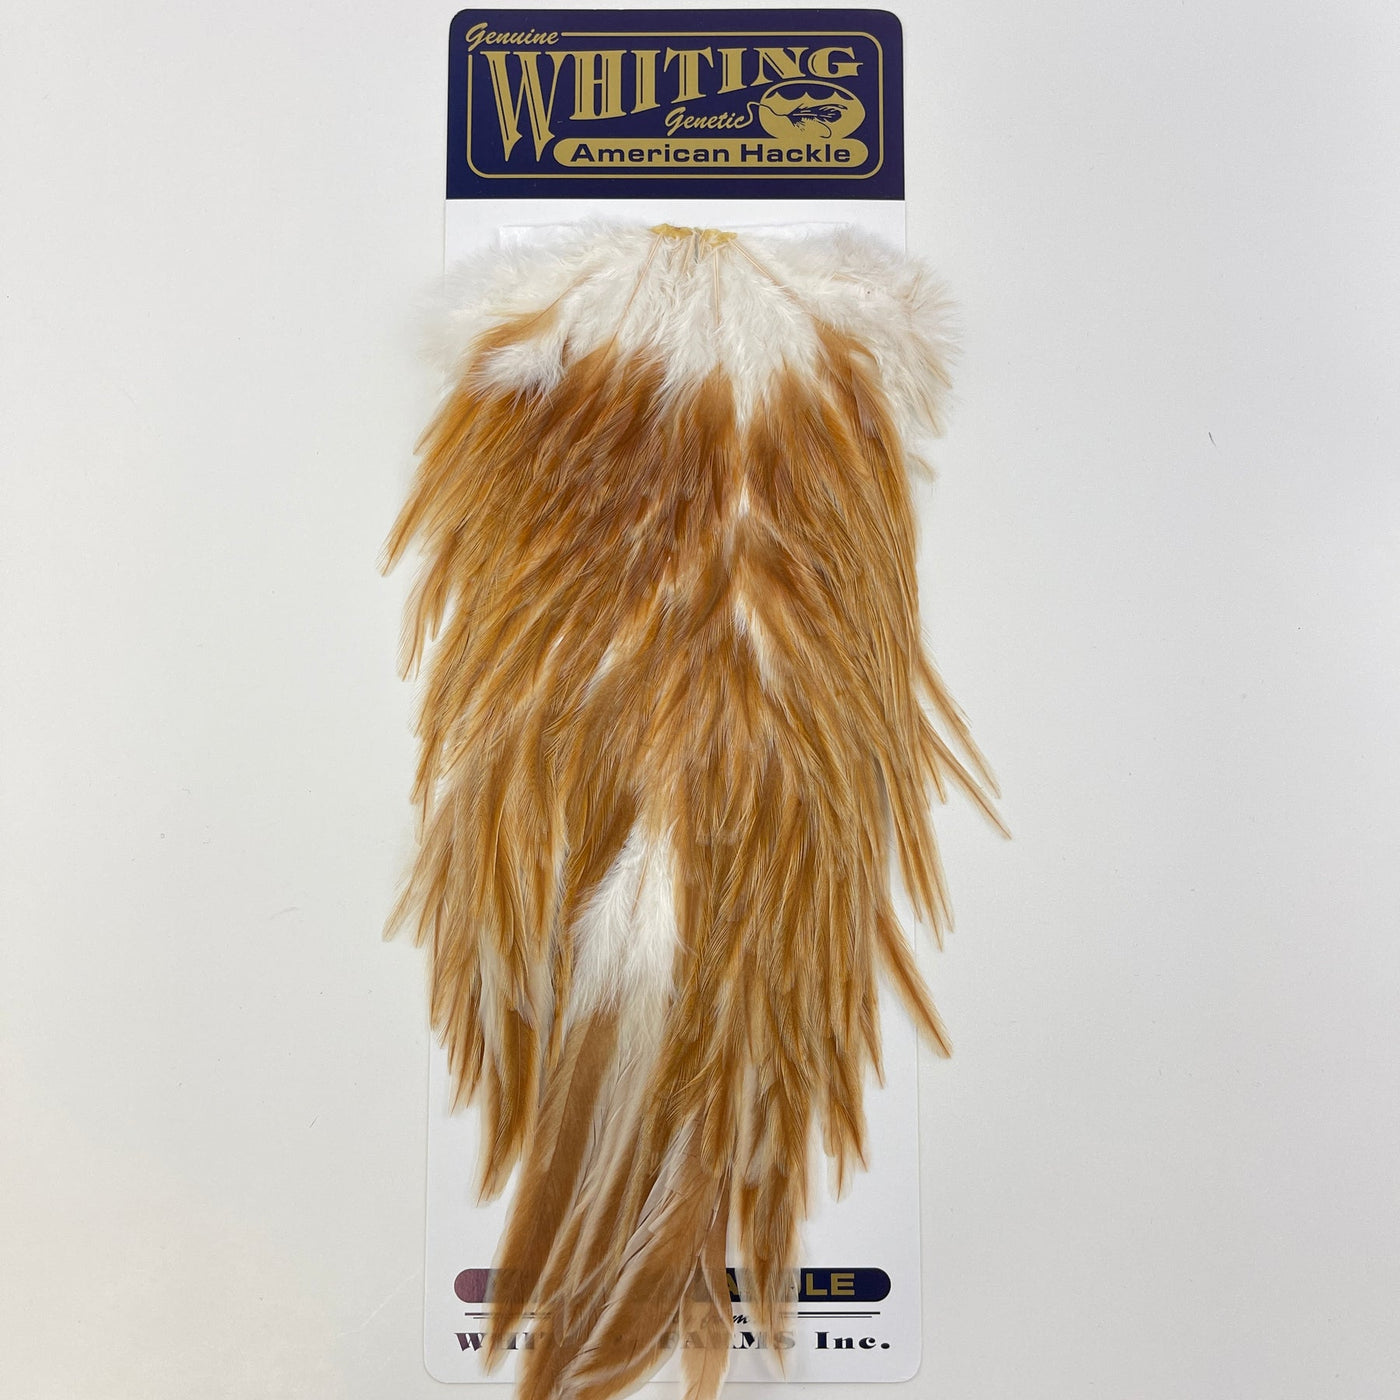 Whiting Farms Genetic American Rooster Saddle